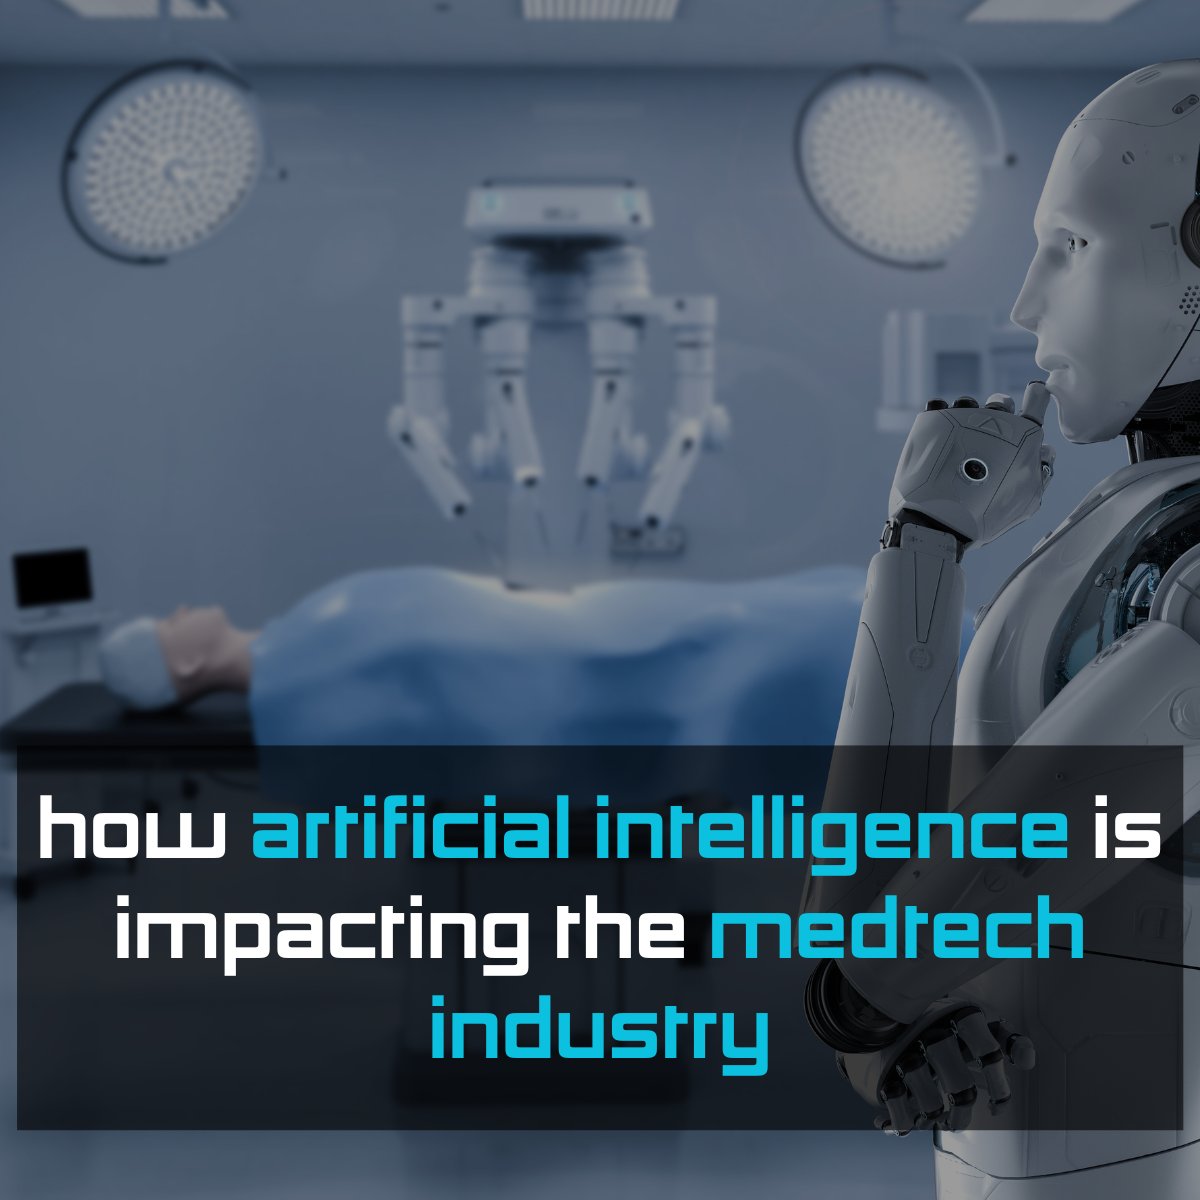 Explore how Artificial Intelligence is revolutionizing the MedTech industry and transforming healthcare. 
bit.ly/ai-in-med-tech
#HealthcareTransformation #AI #MedTech #Healthcare #AI #Technology #Innovation #medicalresearch #health #aiandml #artificialintelligence #rkmadugula